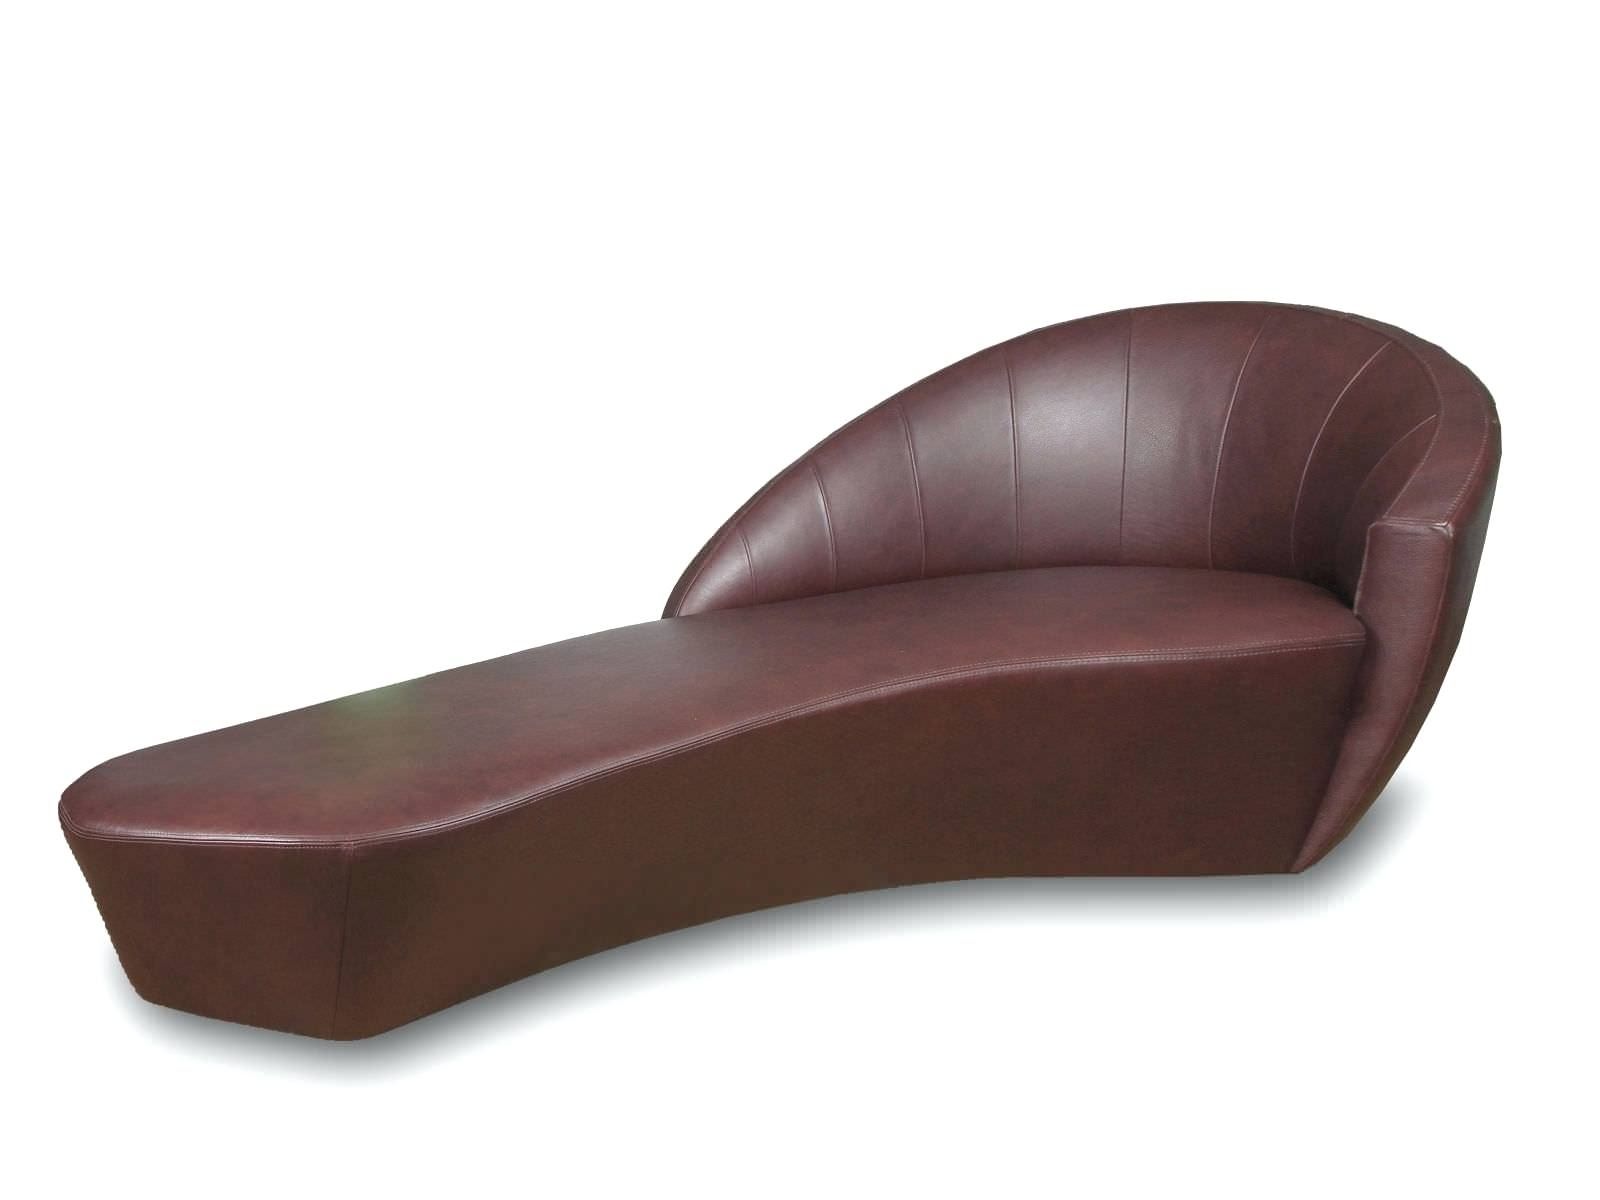 Curved Chaise Lounges With Regard To 2018 Curved Lounge Chair Plans • Lounge Chairs Ideas (View 2 of 15)